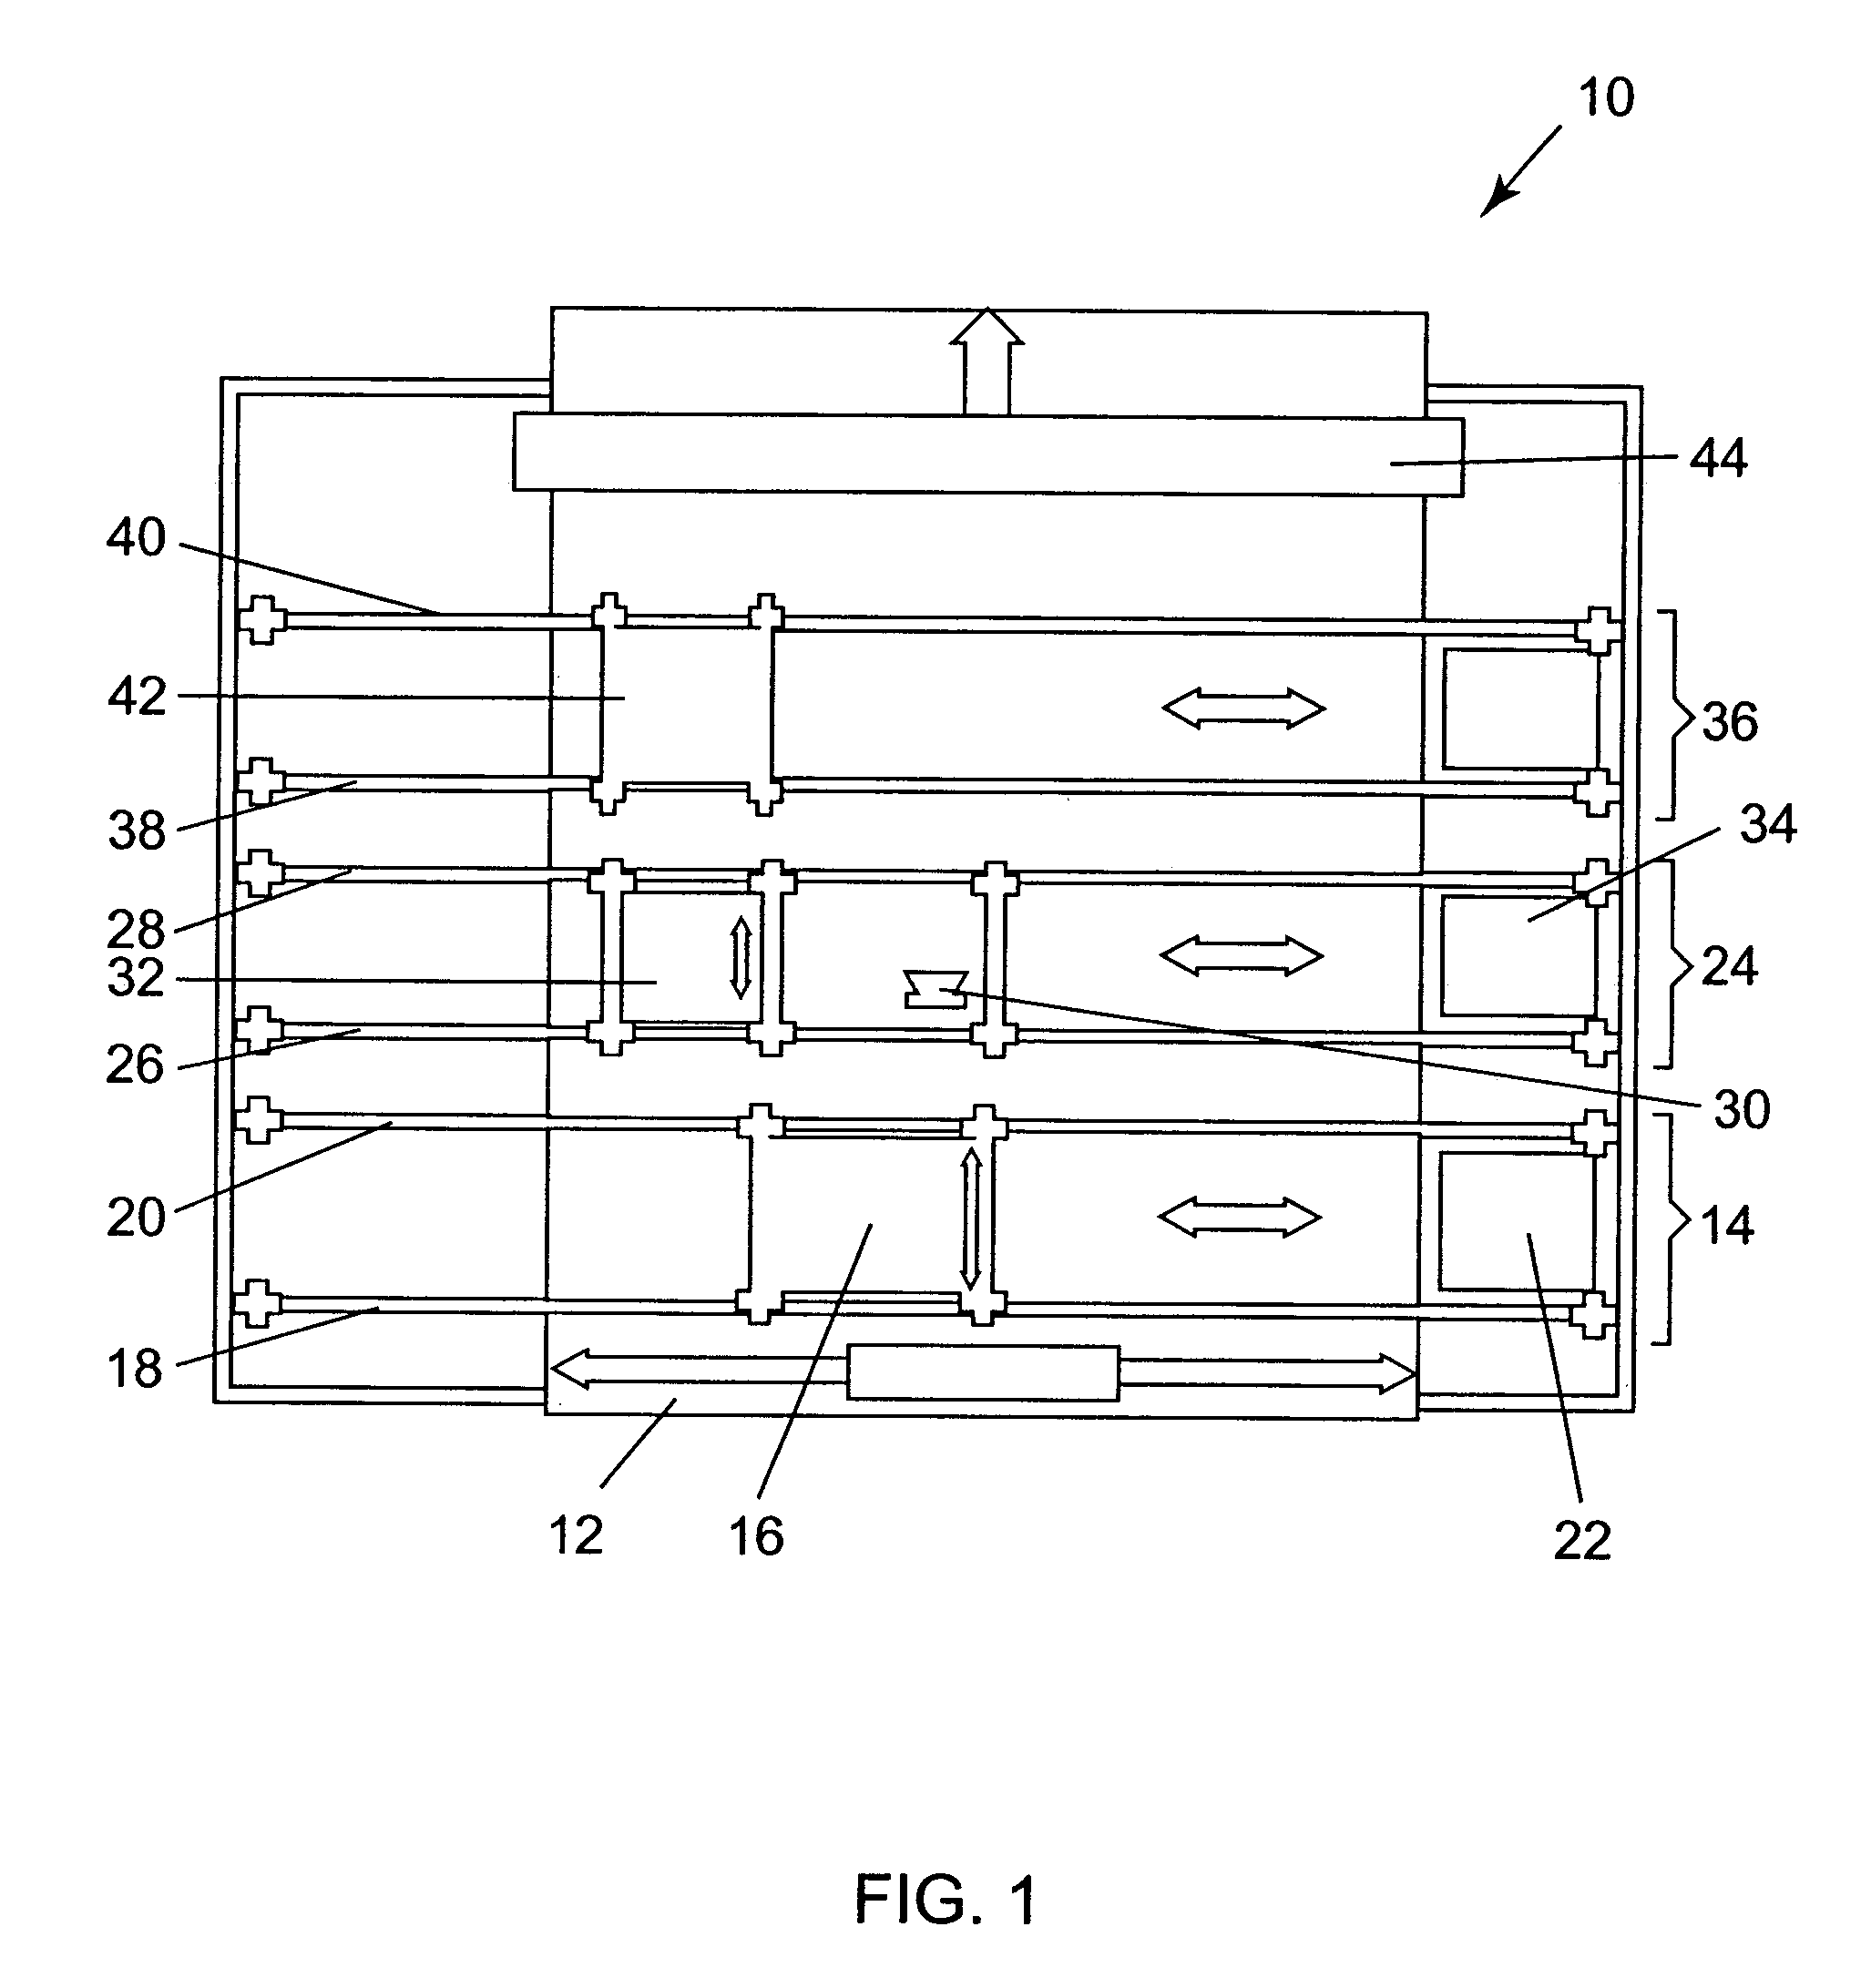 Method of fabrication of a dryer fabric and a dryer fabric with backside venting for improved sheet stability